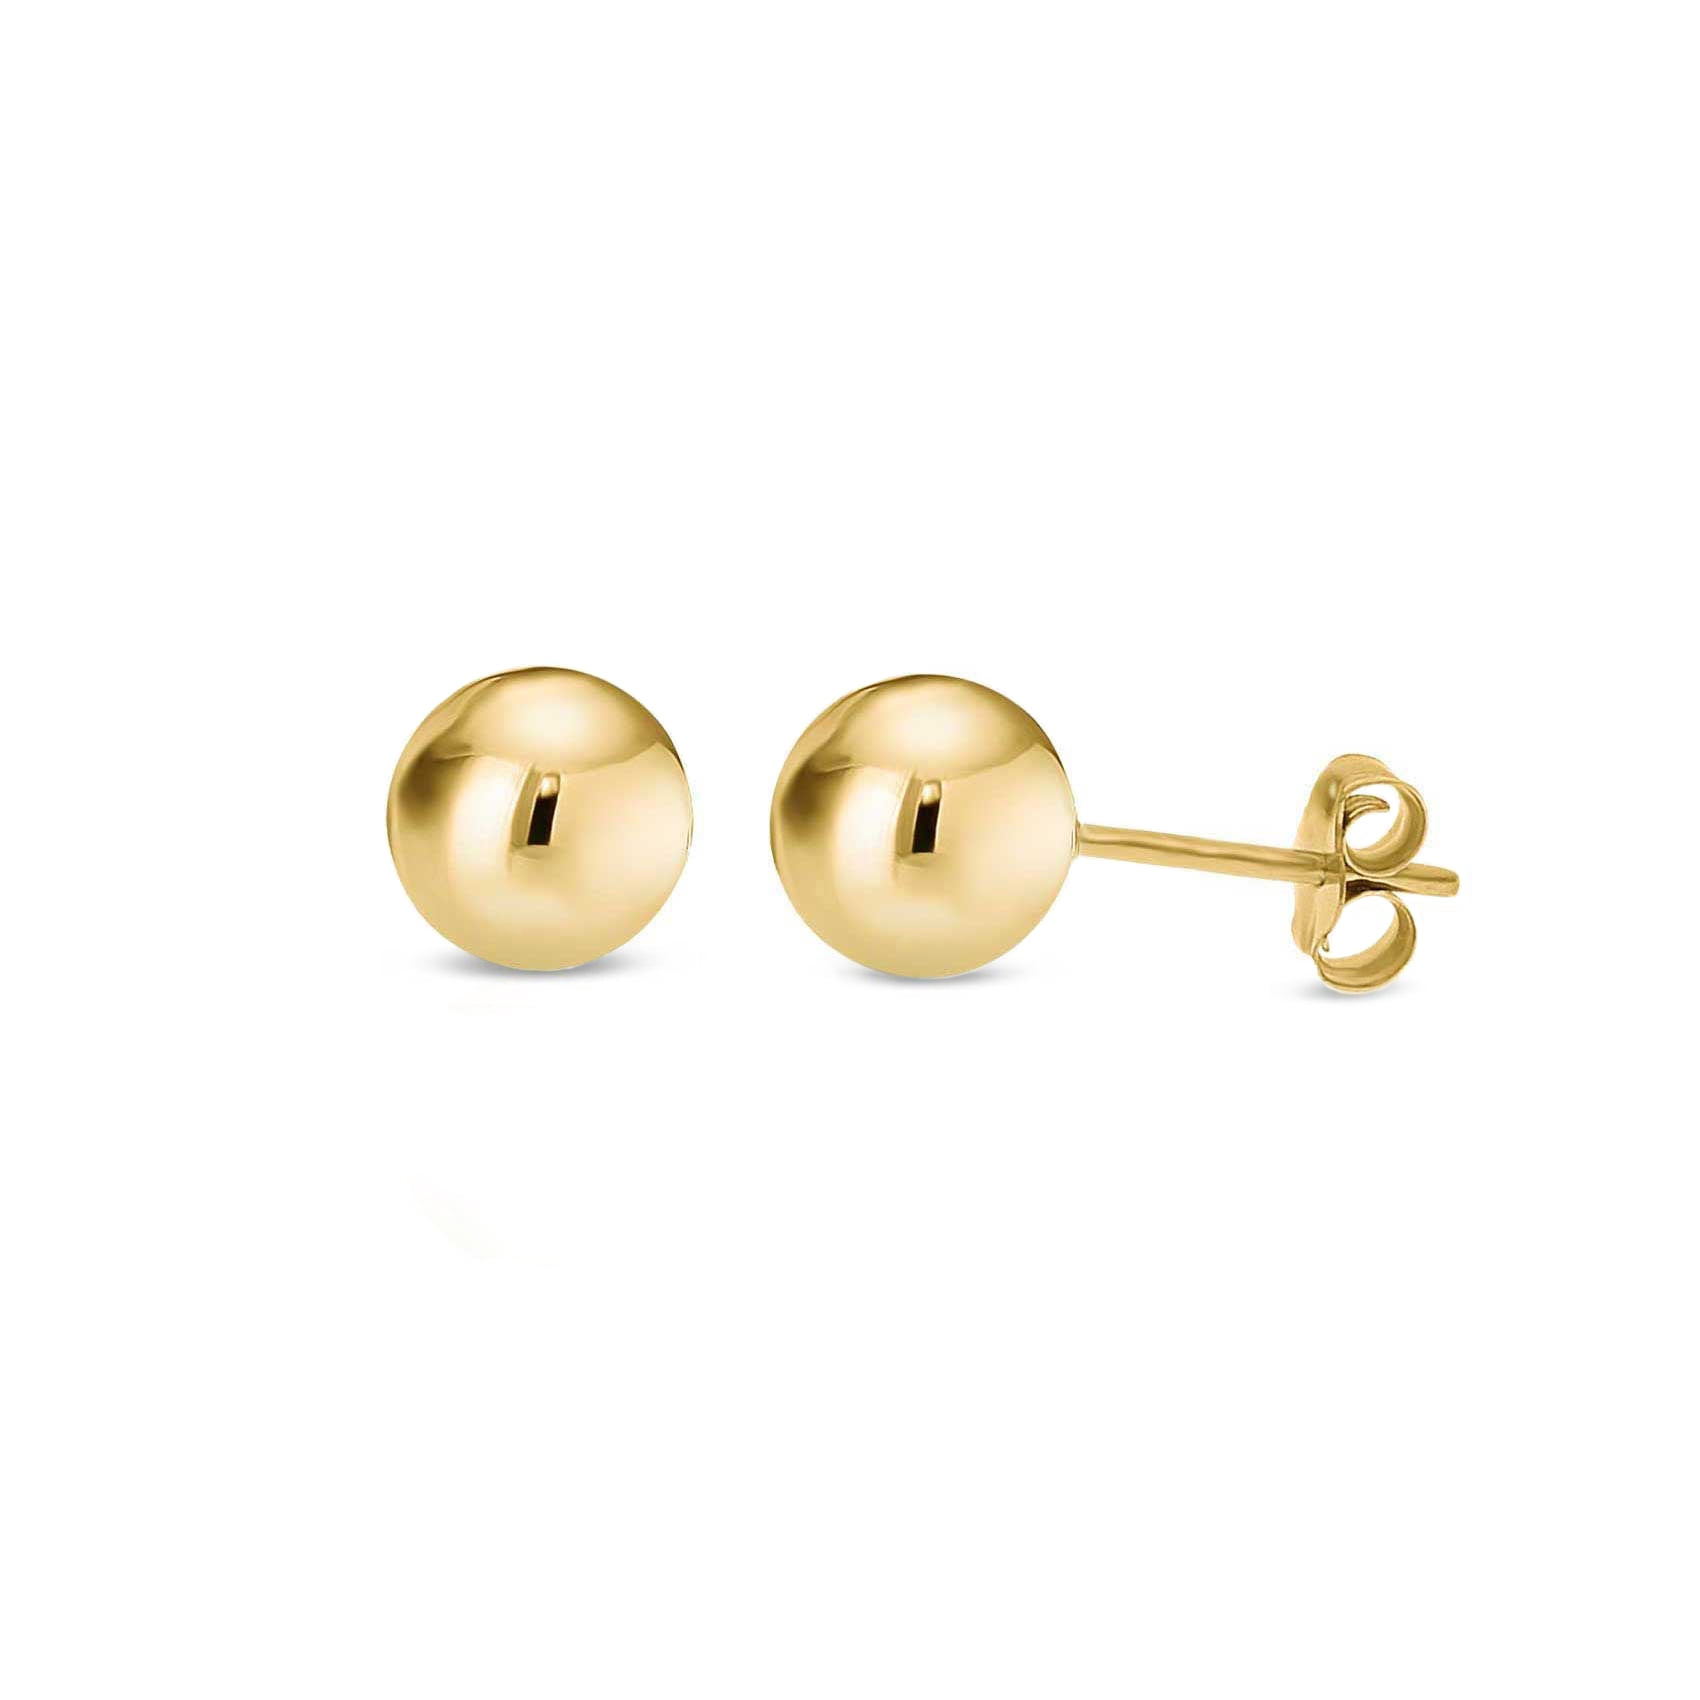 14K Solid Yellow Gold Ball Stud Ladys Children PUSH Back Earrings Sizes:2-14mm 